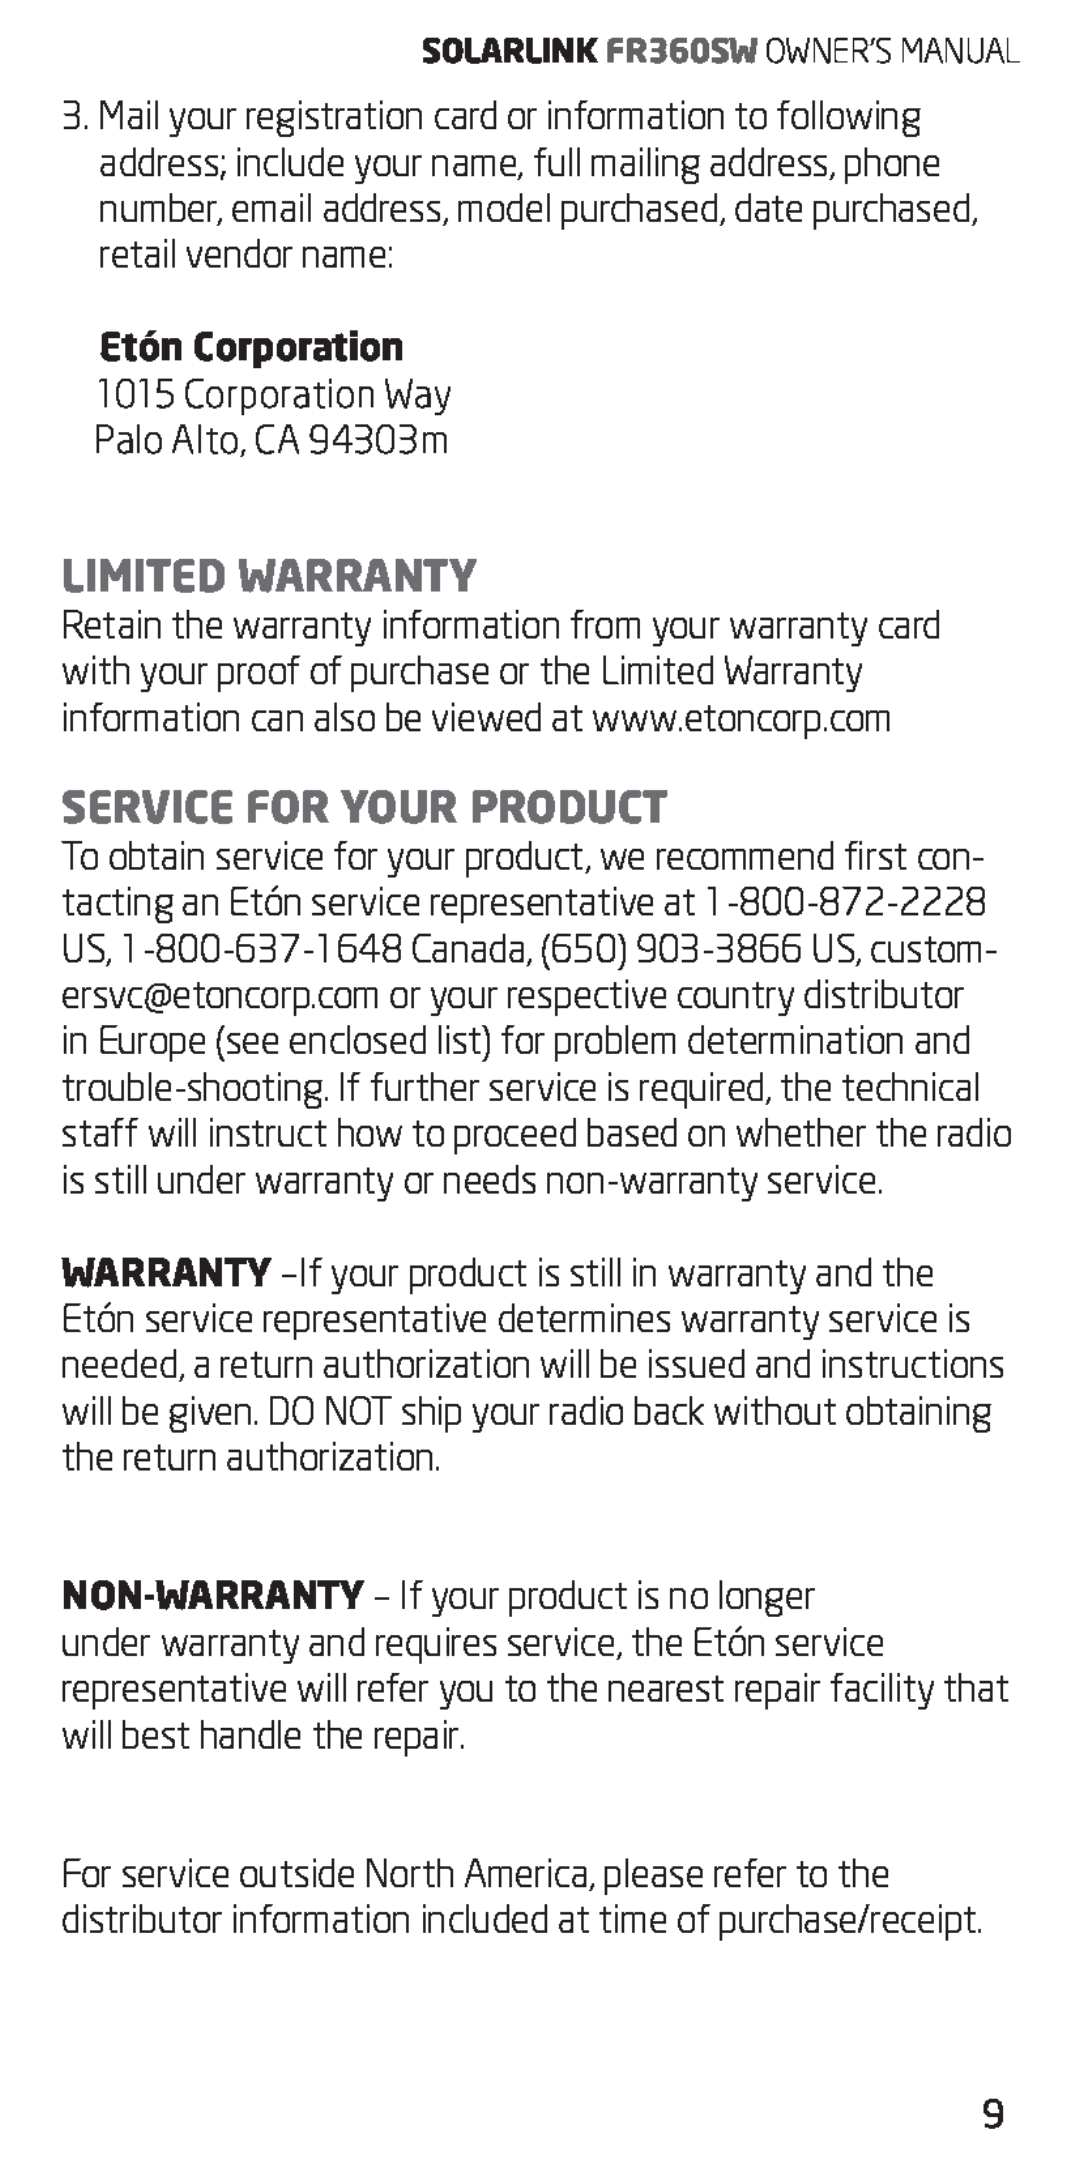 Eton FR360 owner manual Limited Warranty, Service For Your Product 